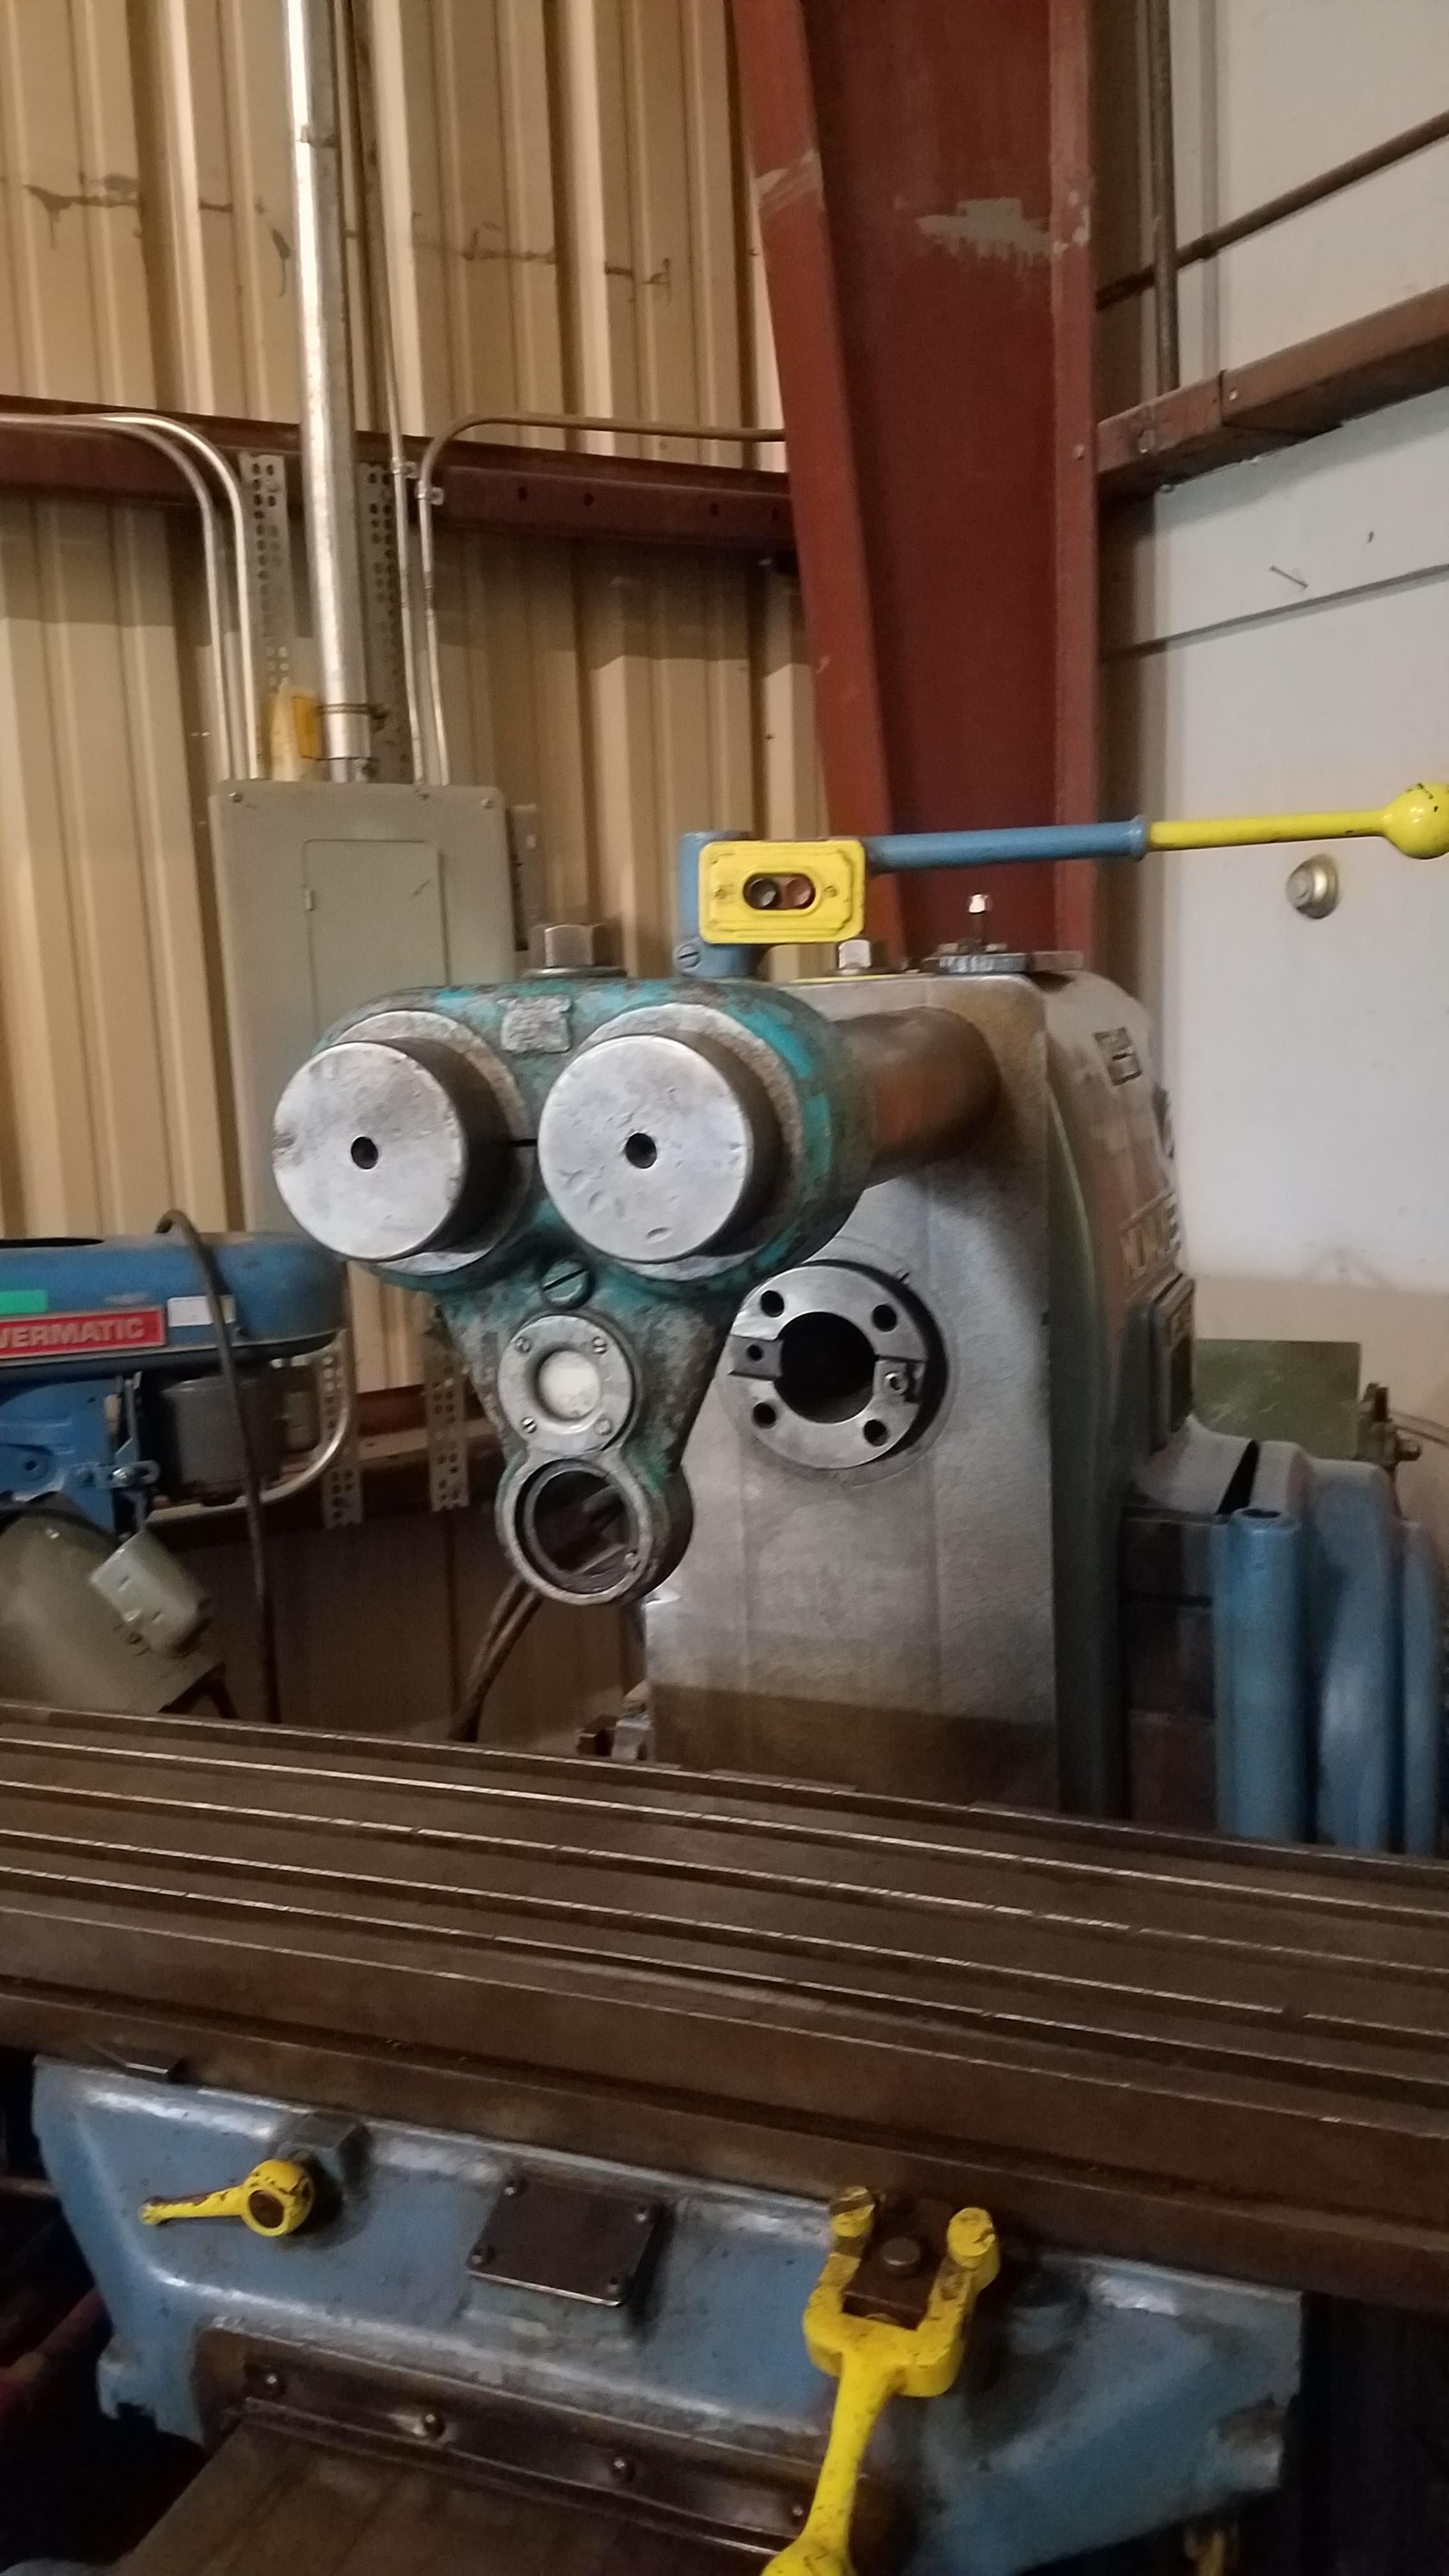 This machine has seen some shit